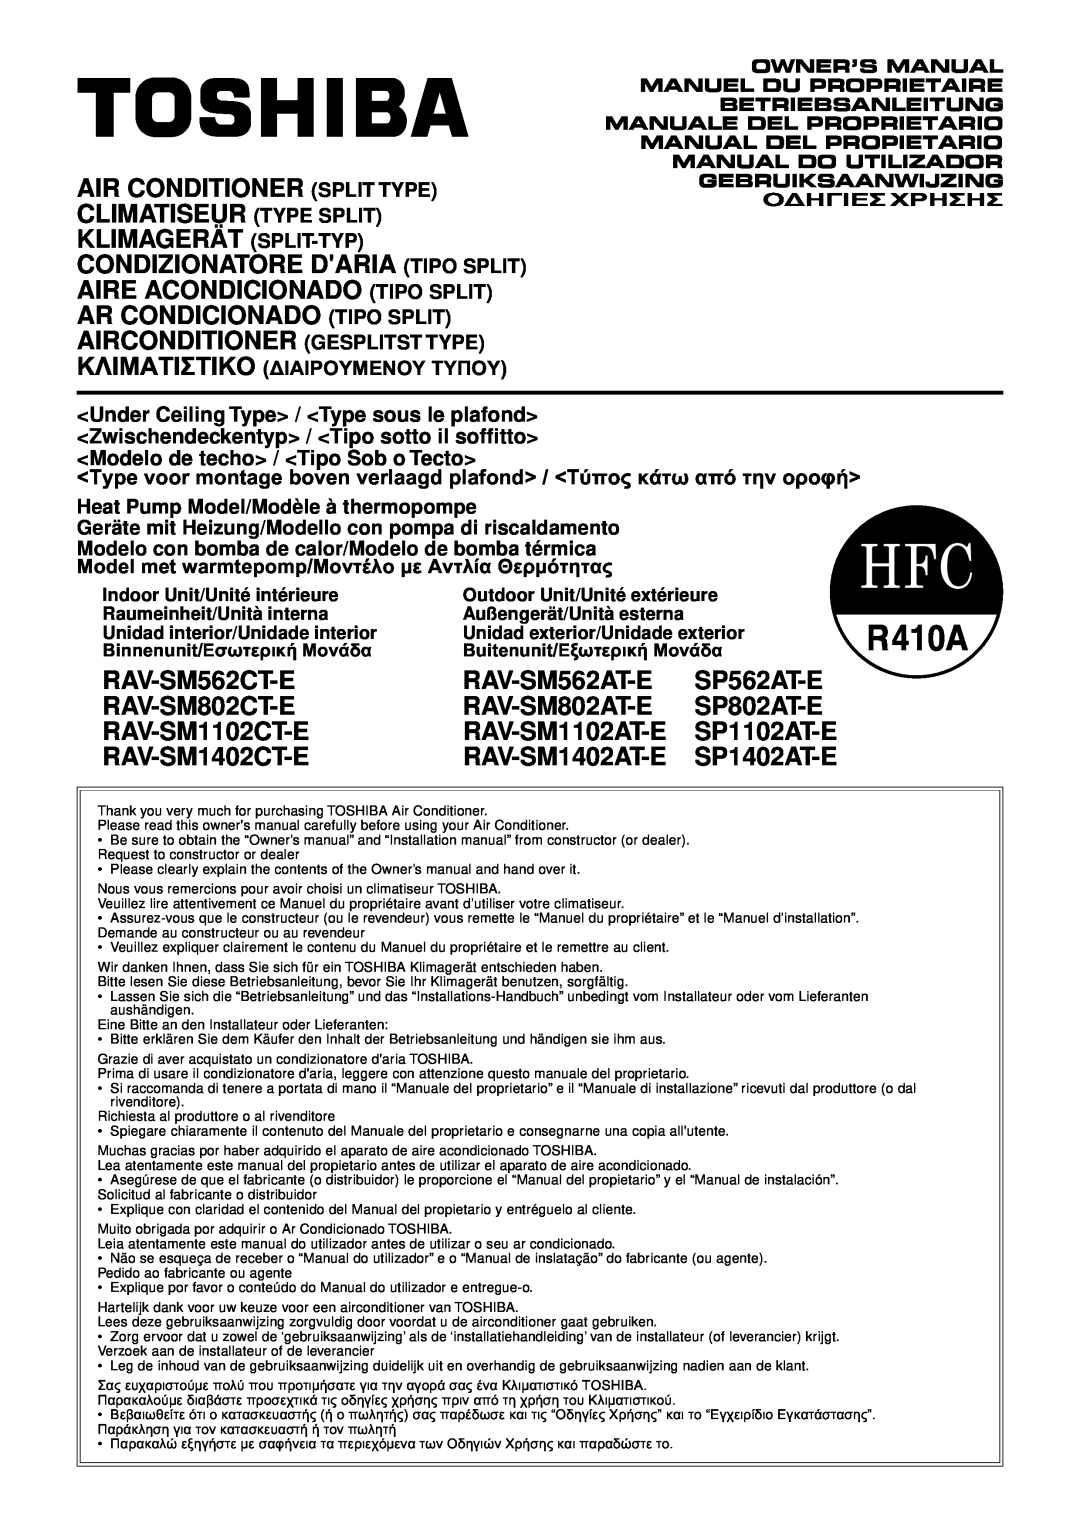 Toshiba RAV-SM802AT-E service manual FILE NO. SVM-06012, Air-Conditioner, Under Ceiling / Console Type, R410A 